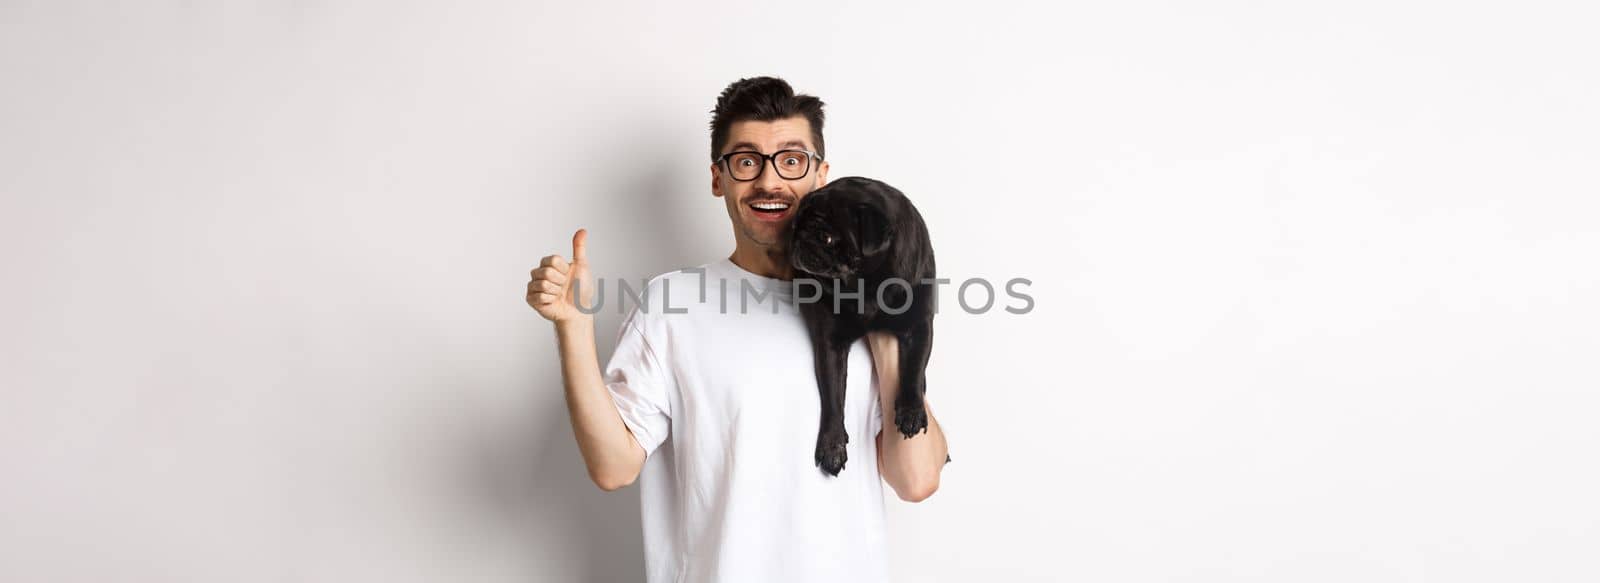 Happy and satisfied dog owner showing thumb-up, holding cute black pug on shoulder, recommending pet products, standing over white background.